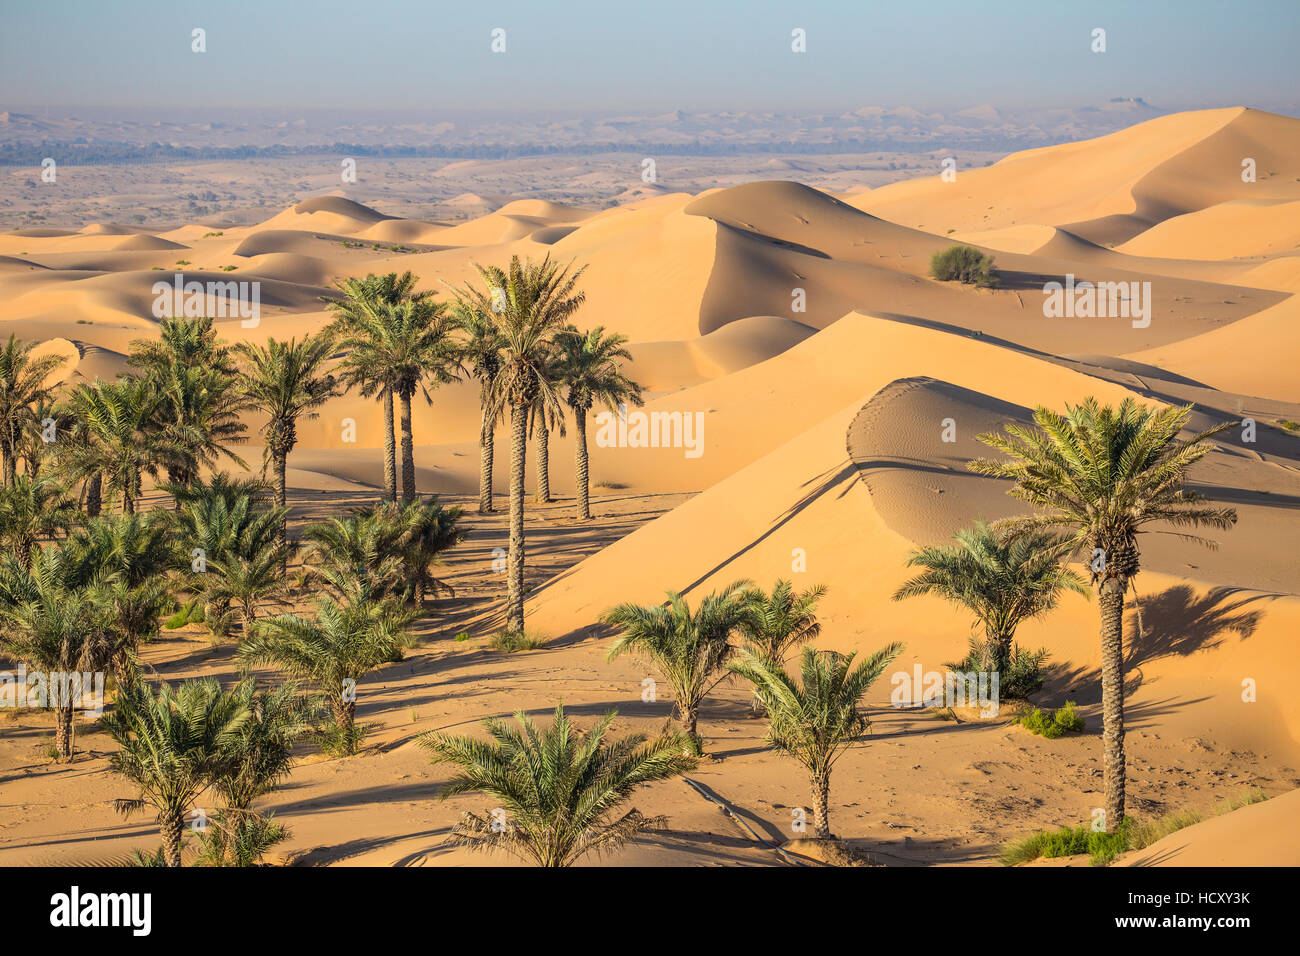 Al Ain Oasis High Resolution Stock Photography And Images Alamy